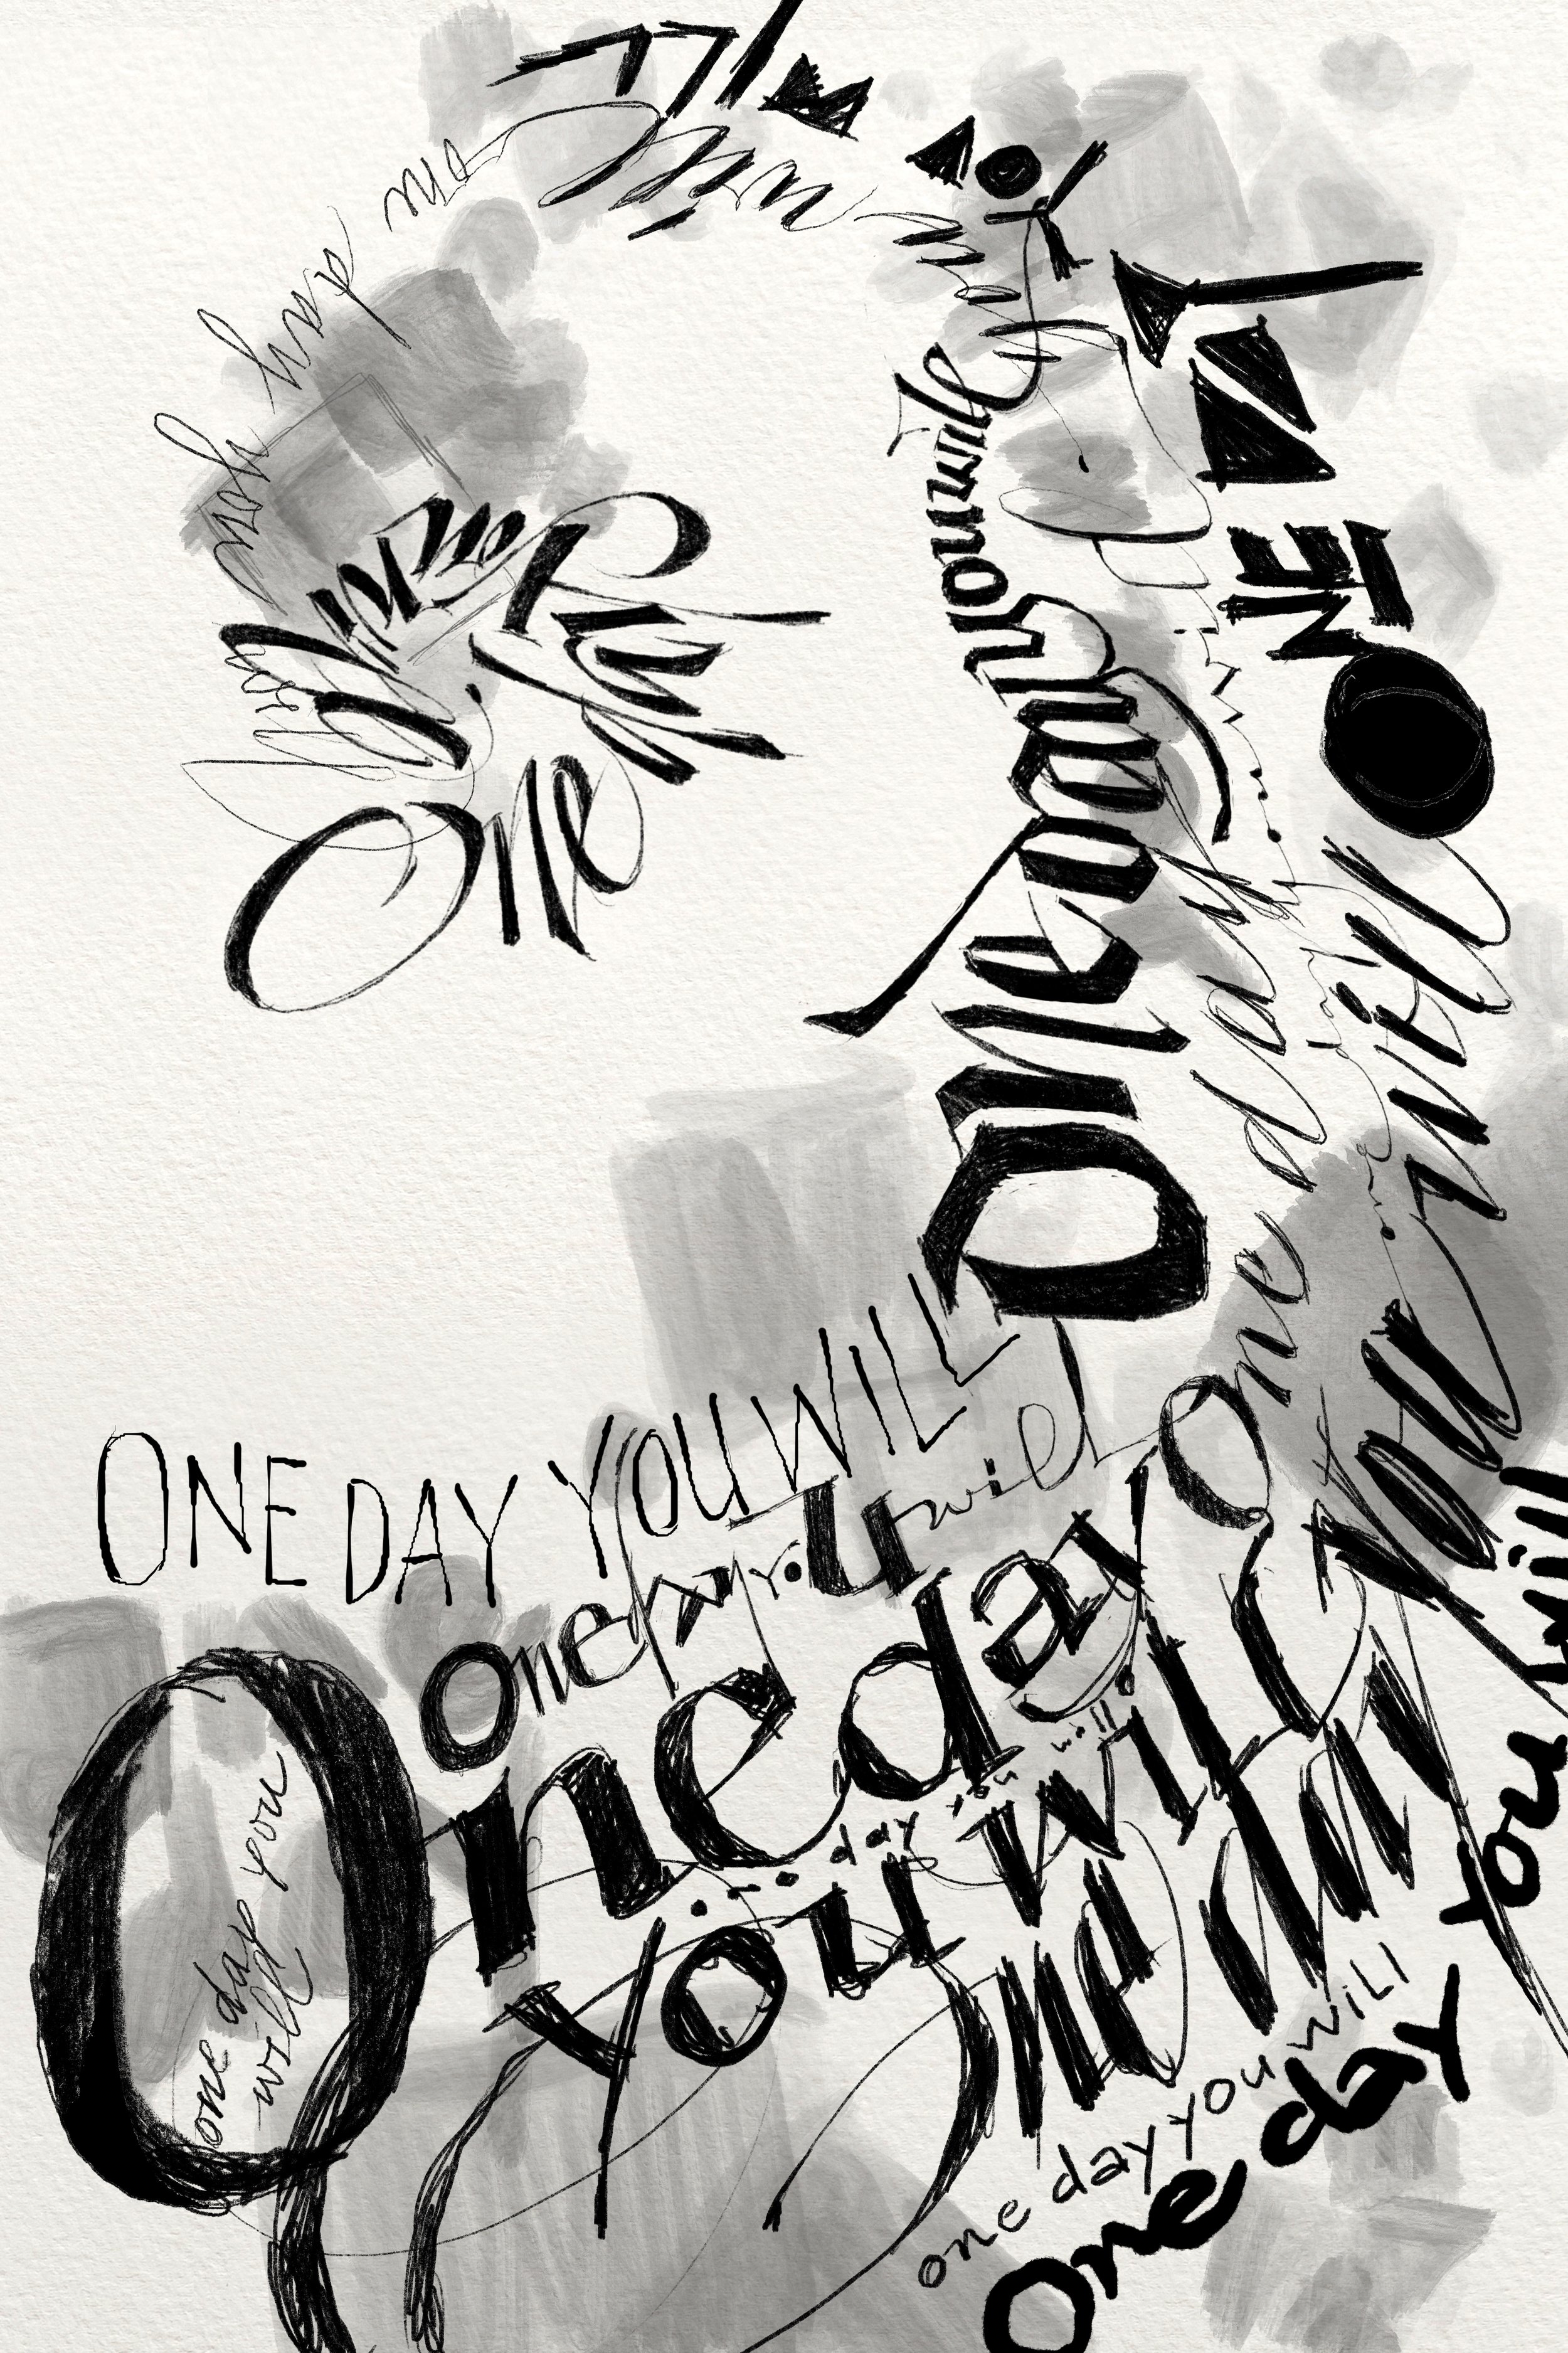 Process: Exploring composition: The words "One day you will" in varied styles, rising in a swirl.